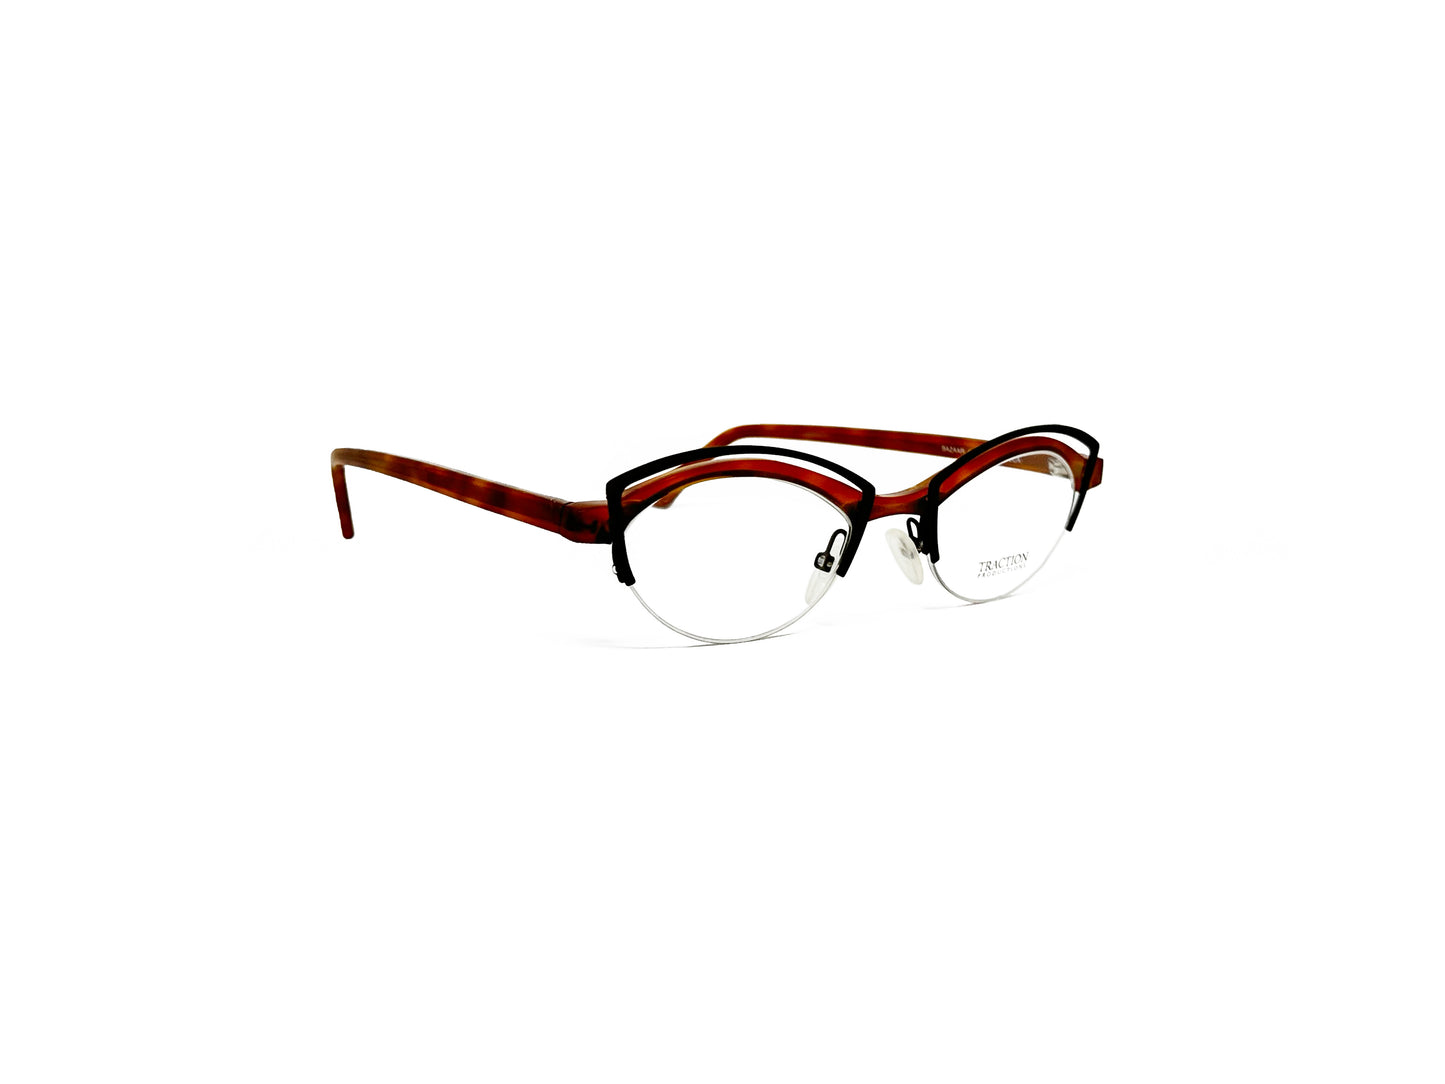 Traction metal, rounded cat-eye optical frame with cutouts at top of frame. Model: Bazaar. Color: Ecacoa - Reddish-orange and black. Side view.